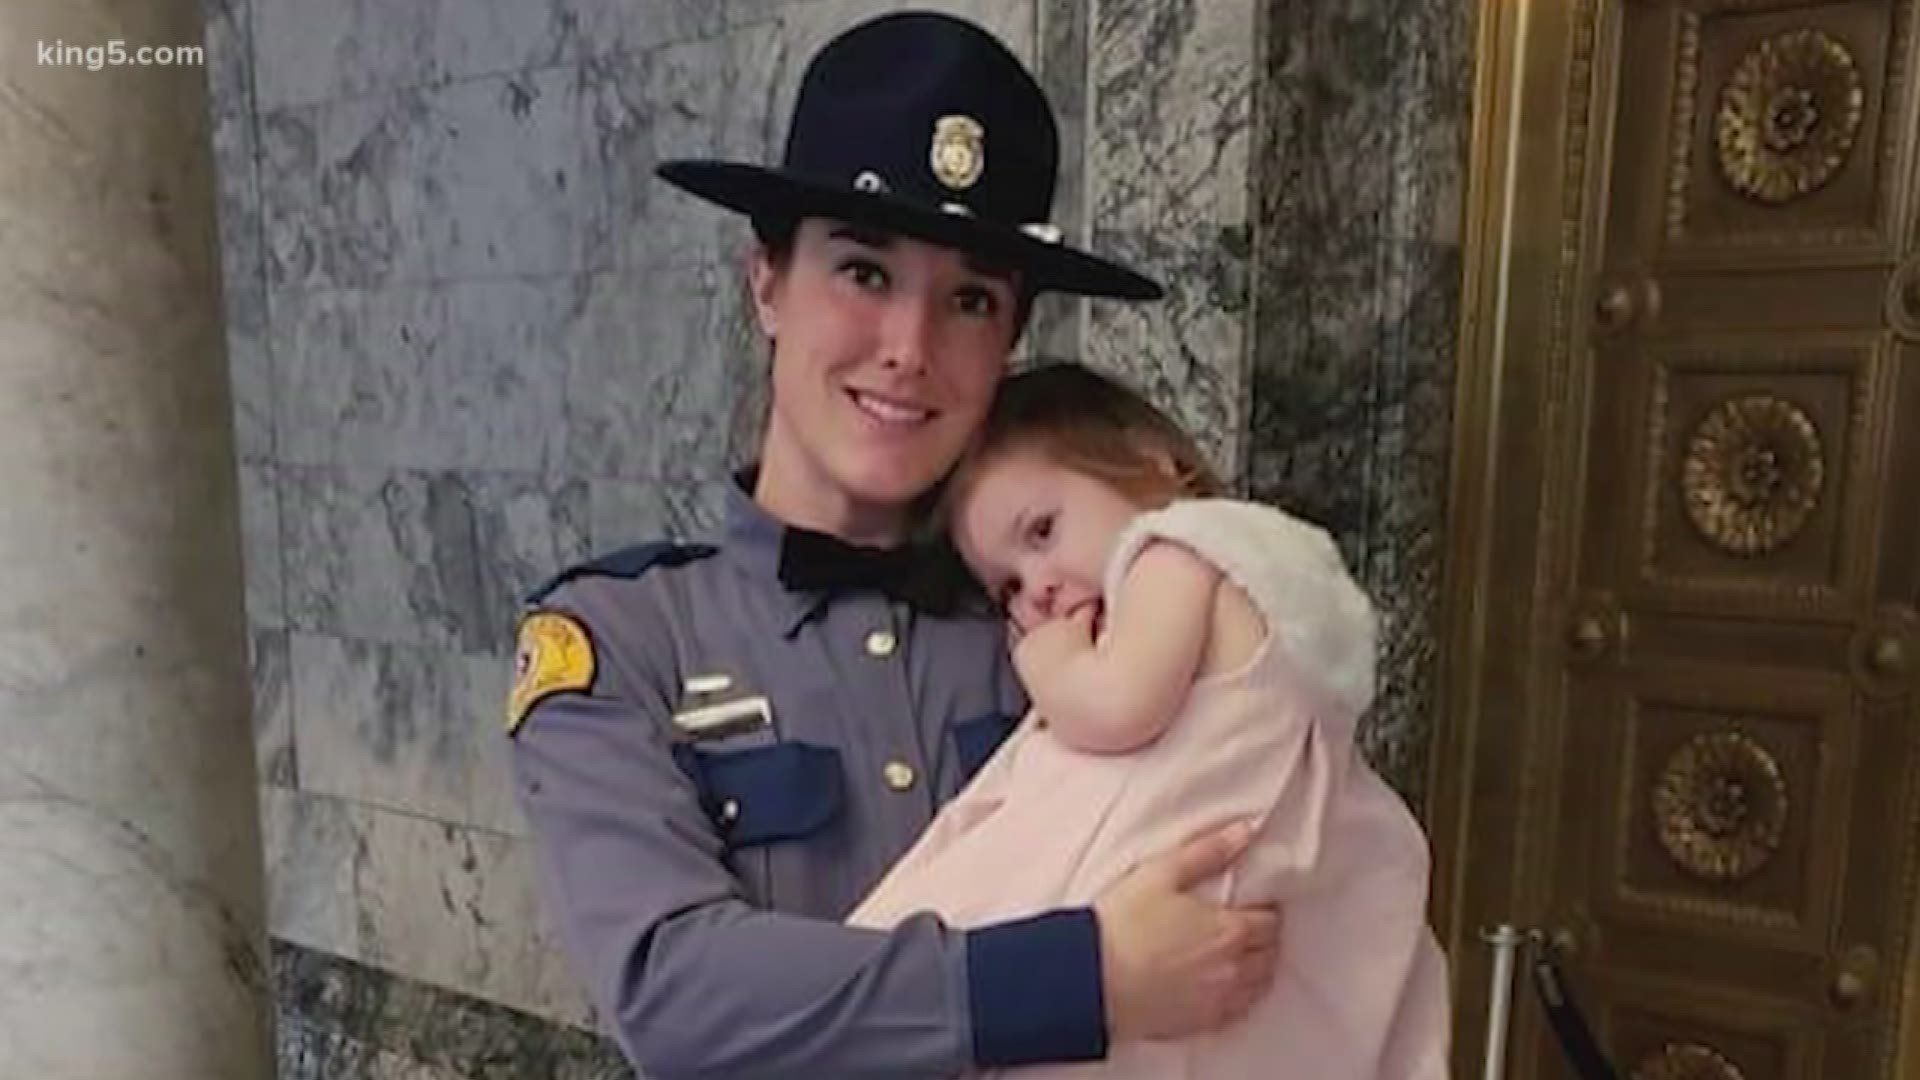 Trooper Hartman has pulled from her life experience to pursue a career with the Washington State Patrol. KING 5's Amy Moreno reports: